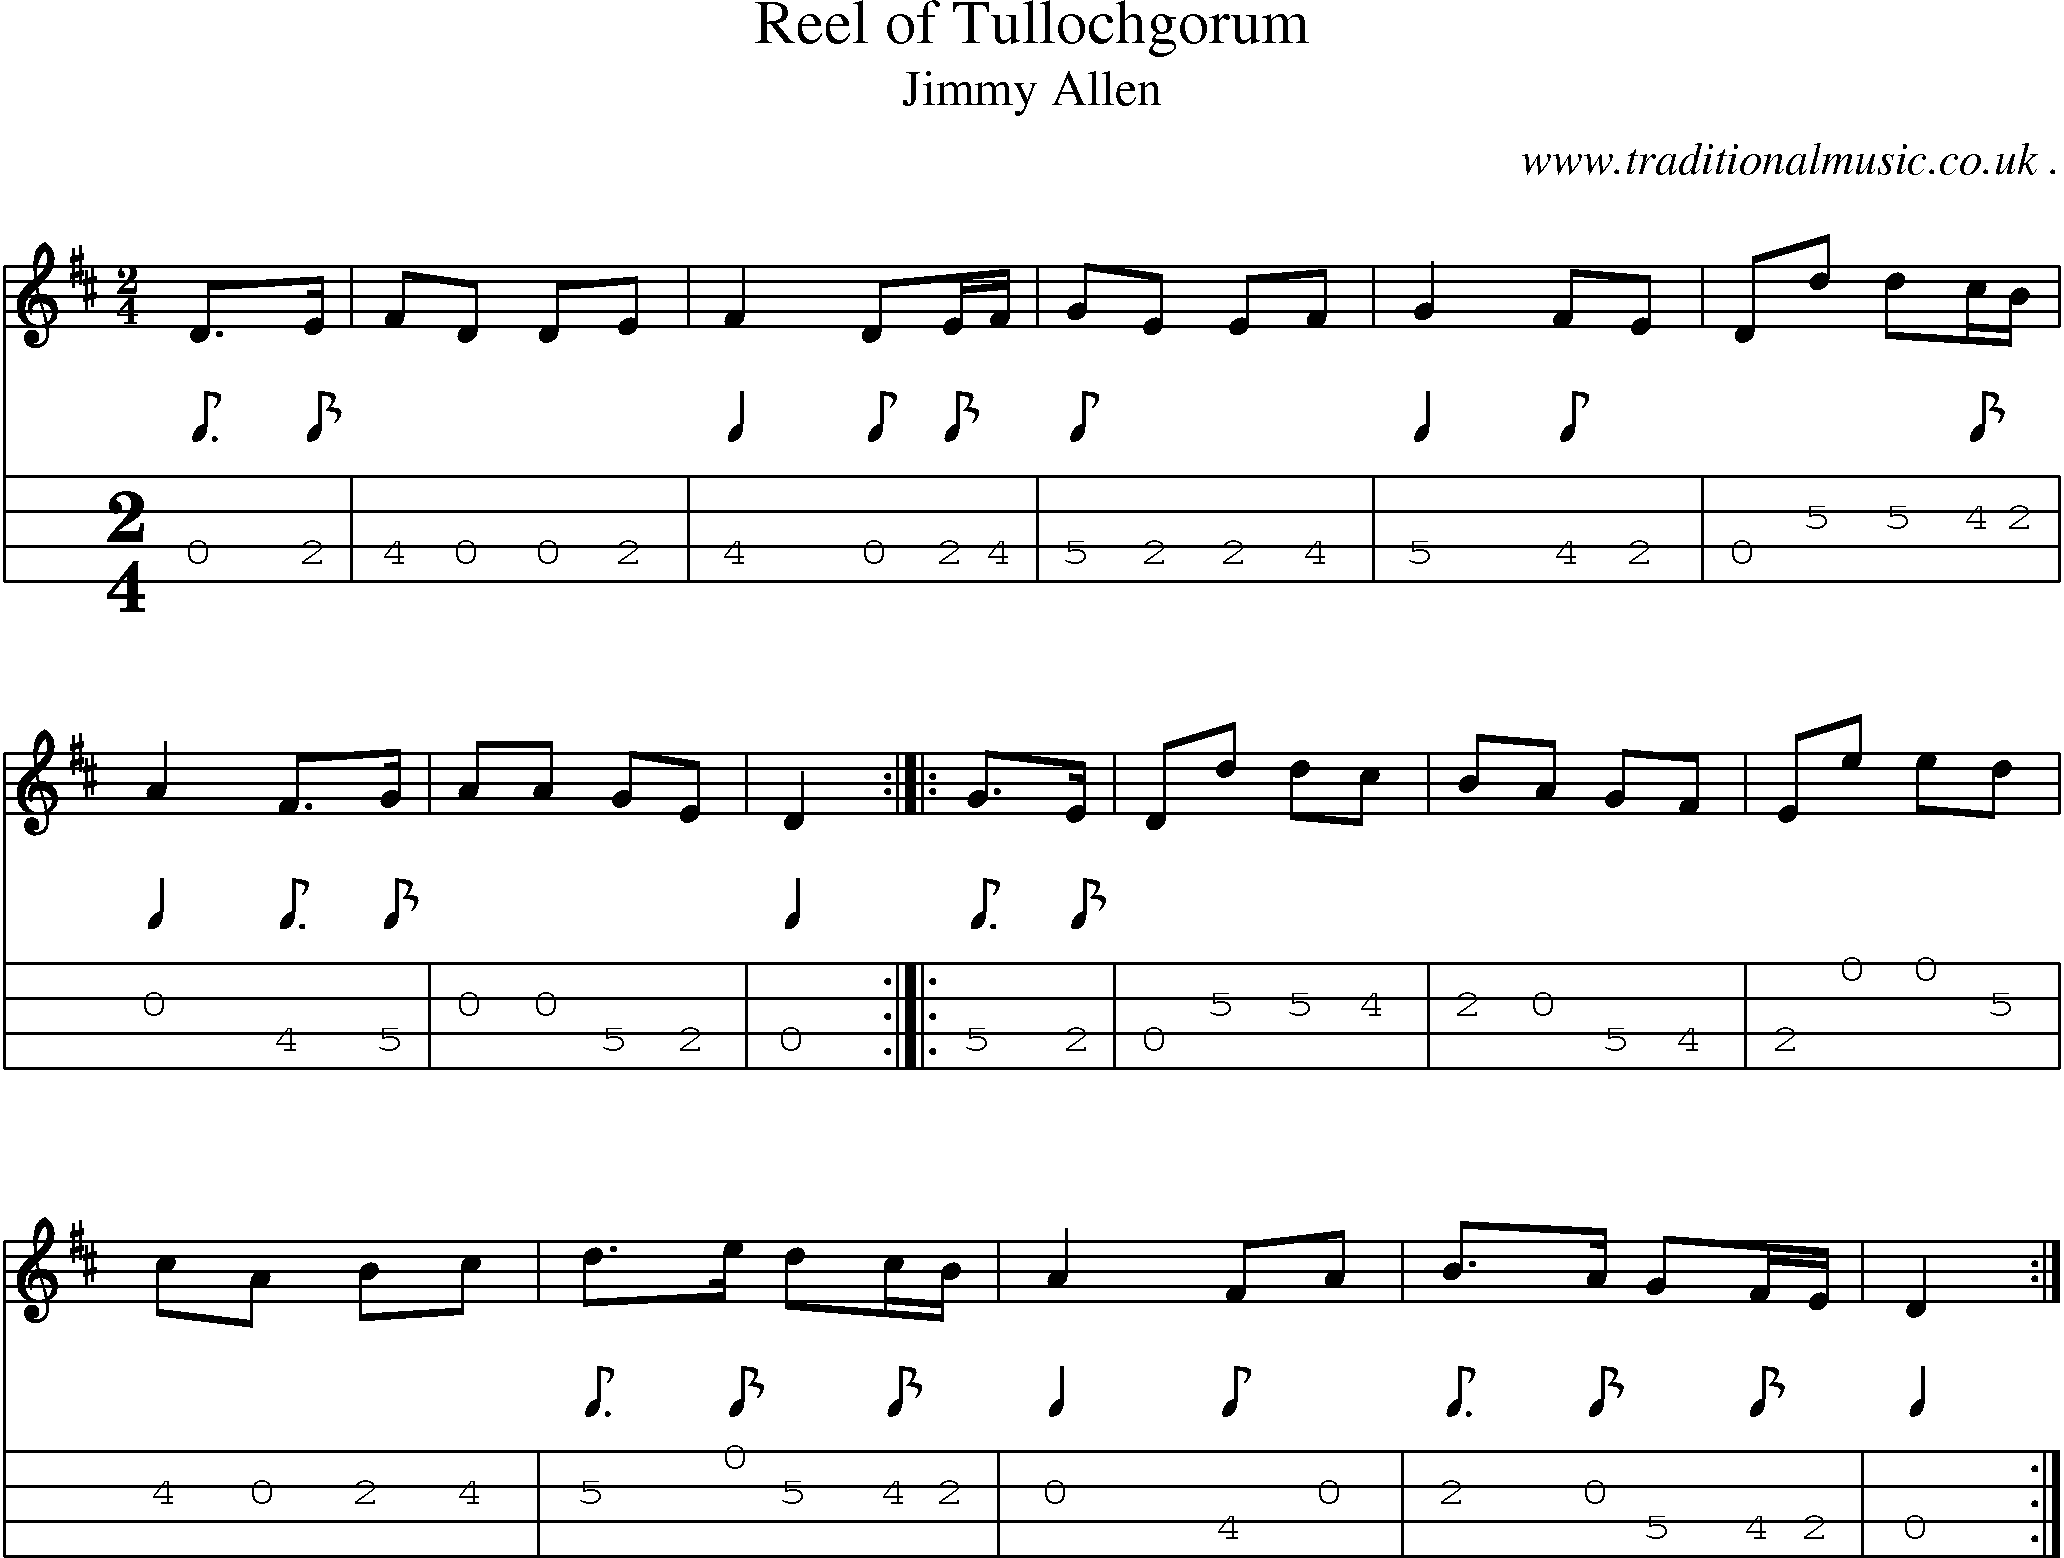 Sheet-music  score, Chords and Mandolin Tabs for Reel Of Tullochgorum